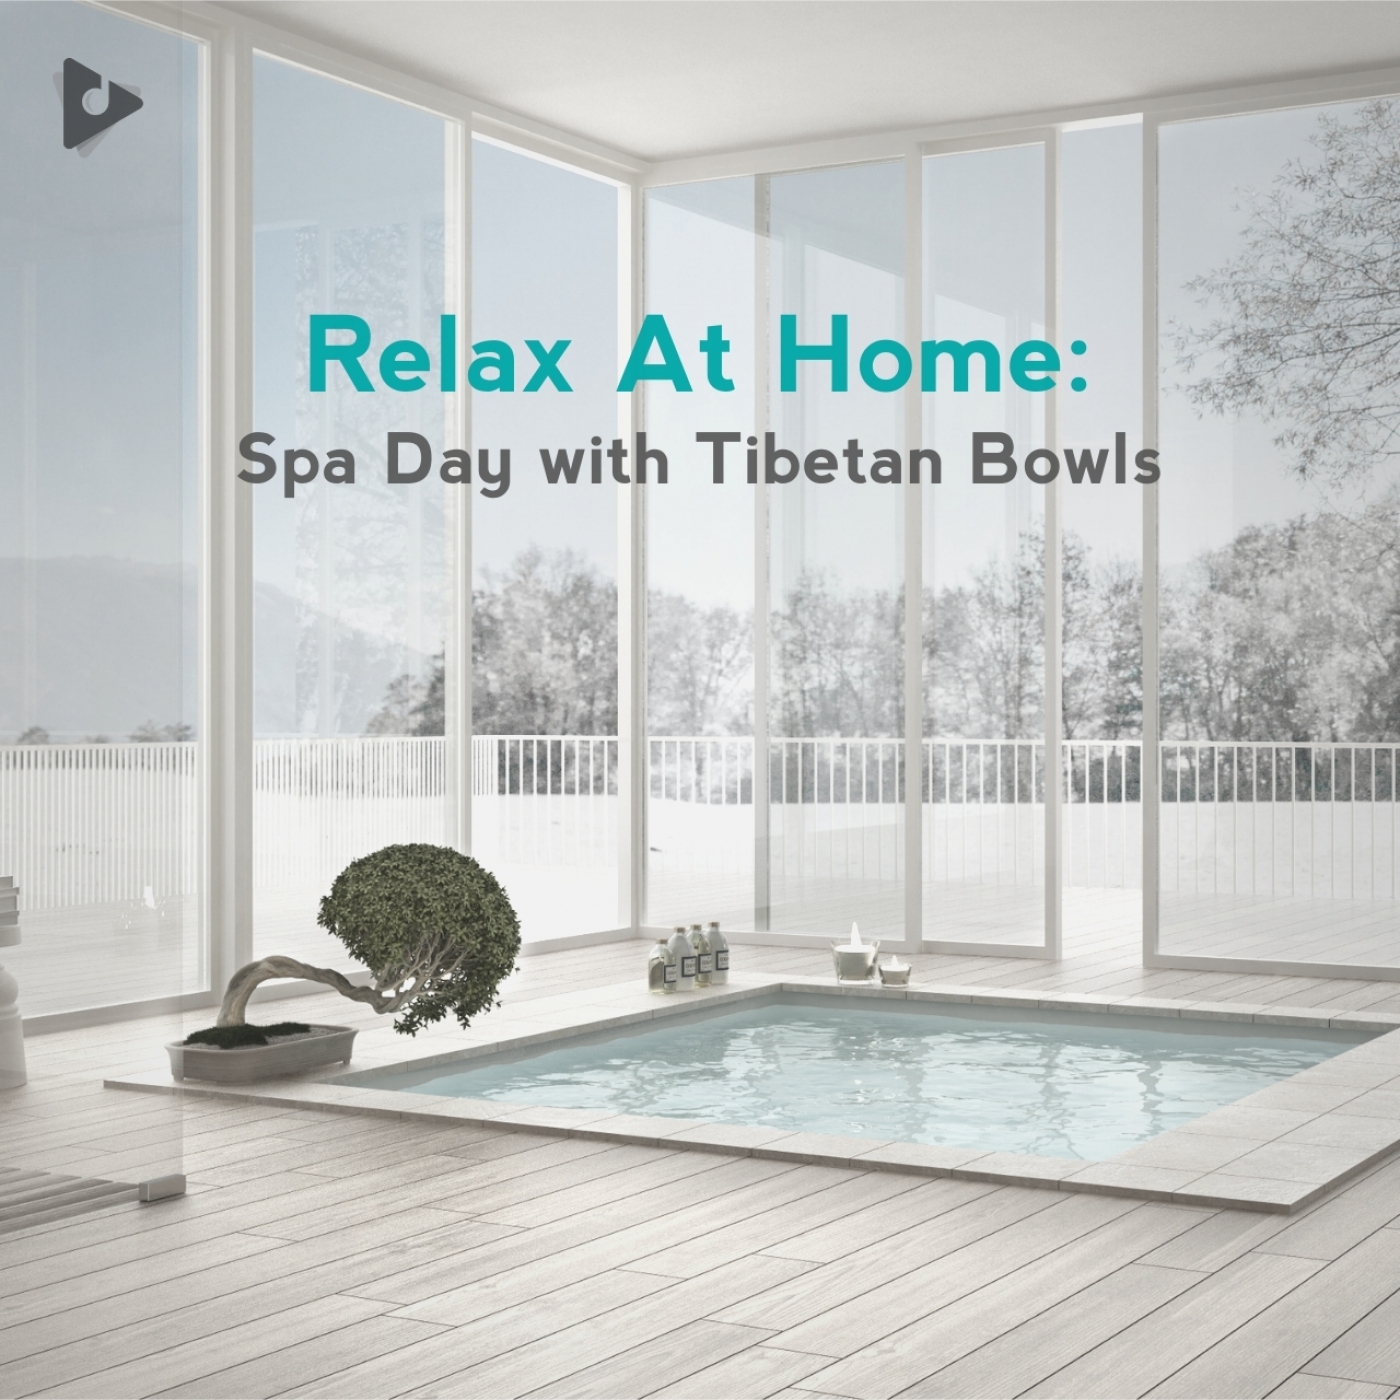 Relax At Home: Spa Day with Tibetan Bowls